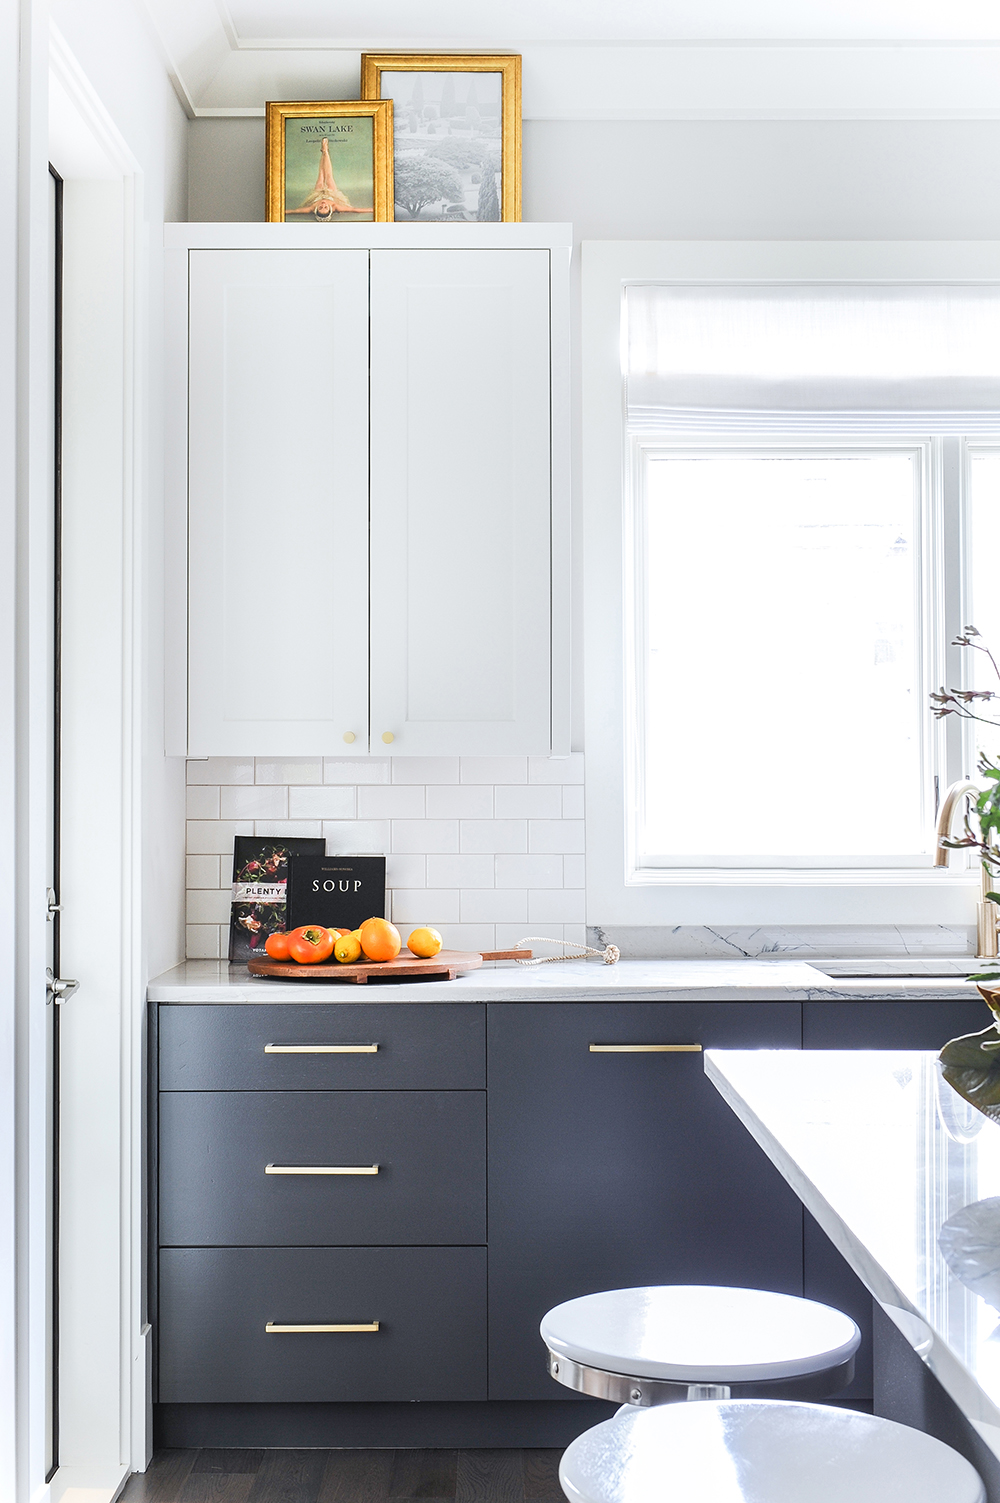 Kitchen countertops styled with warmth, colour and purpose in mind.